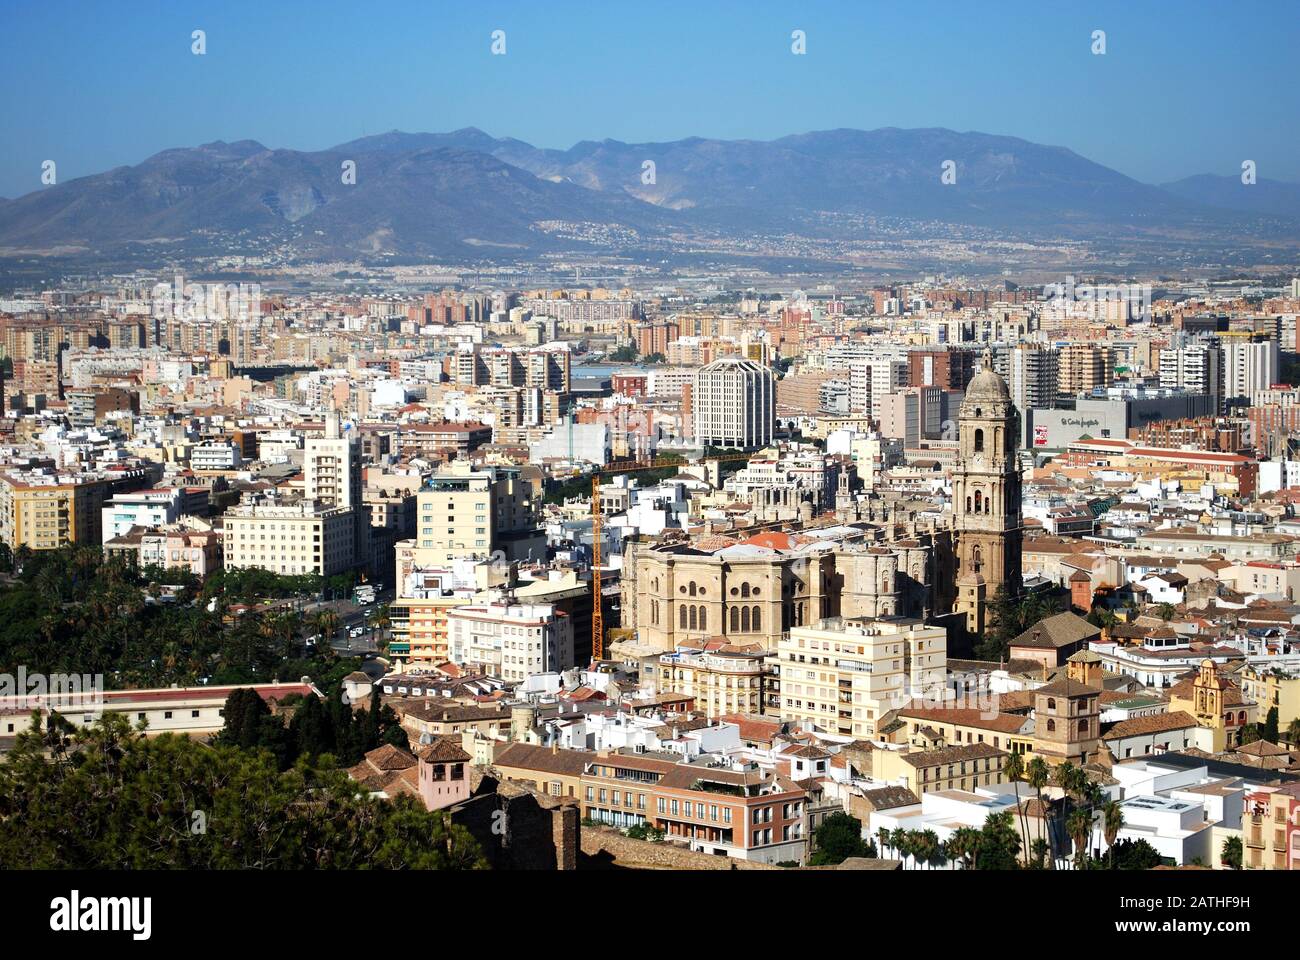 Elevated view of the harbour and city seen from the castle, Malaga, Malaga Province, Andalucia, Spain, Western Europe. Stock Photo